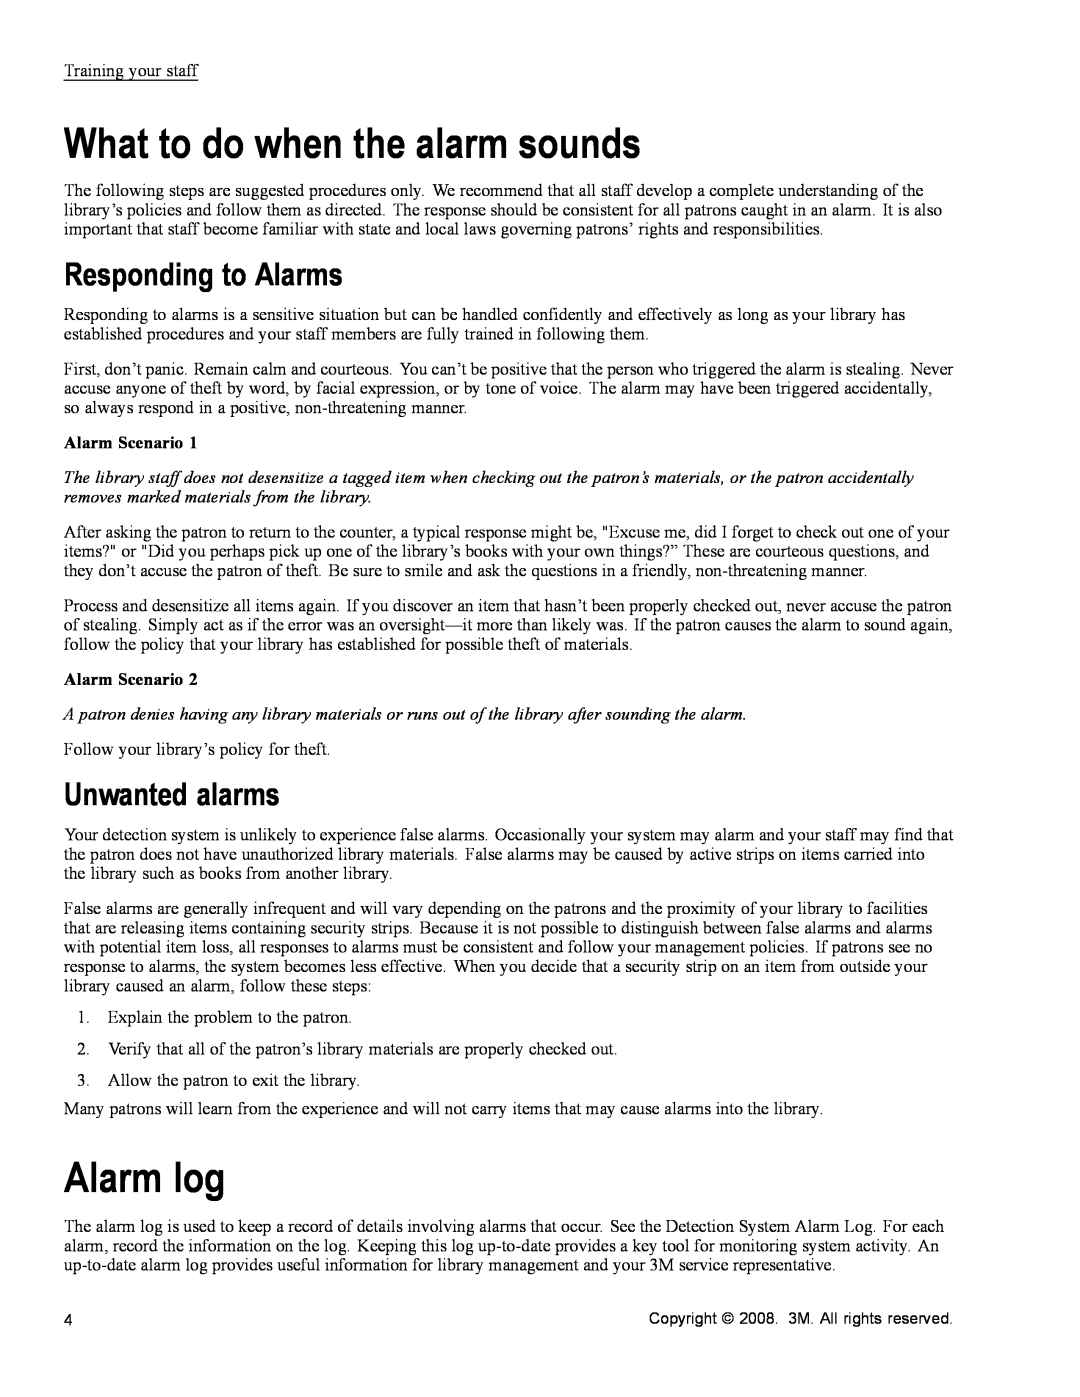 3M 700 Series owner manual What to do when the alarm sounds, Alarm log, Responding to Alarms, Unwanted alarms 